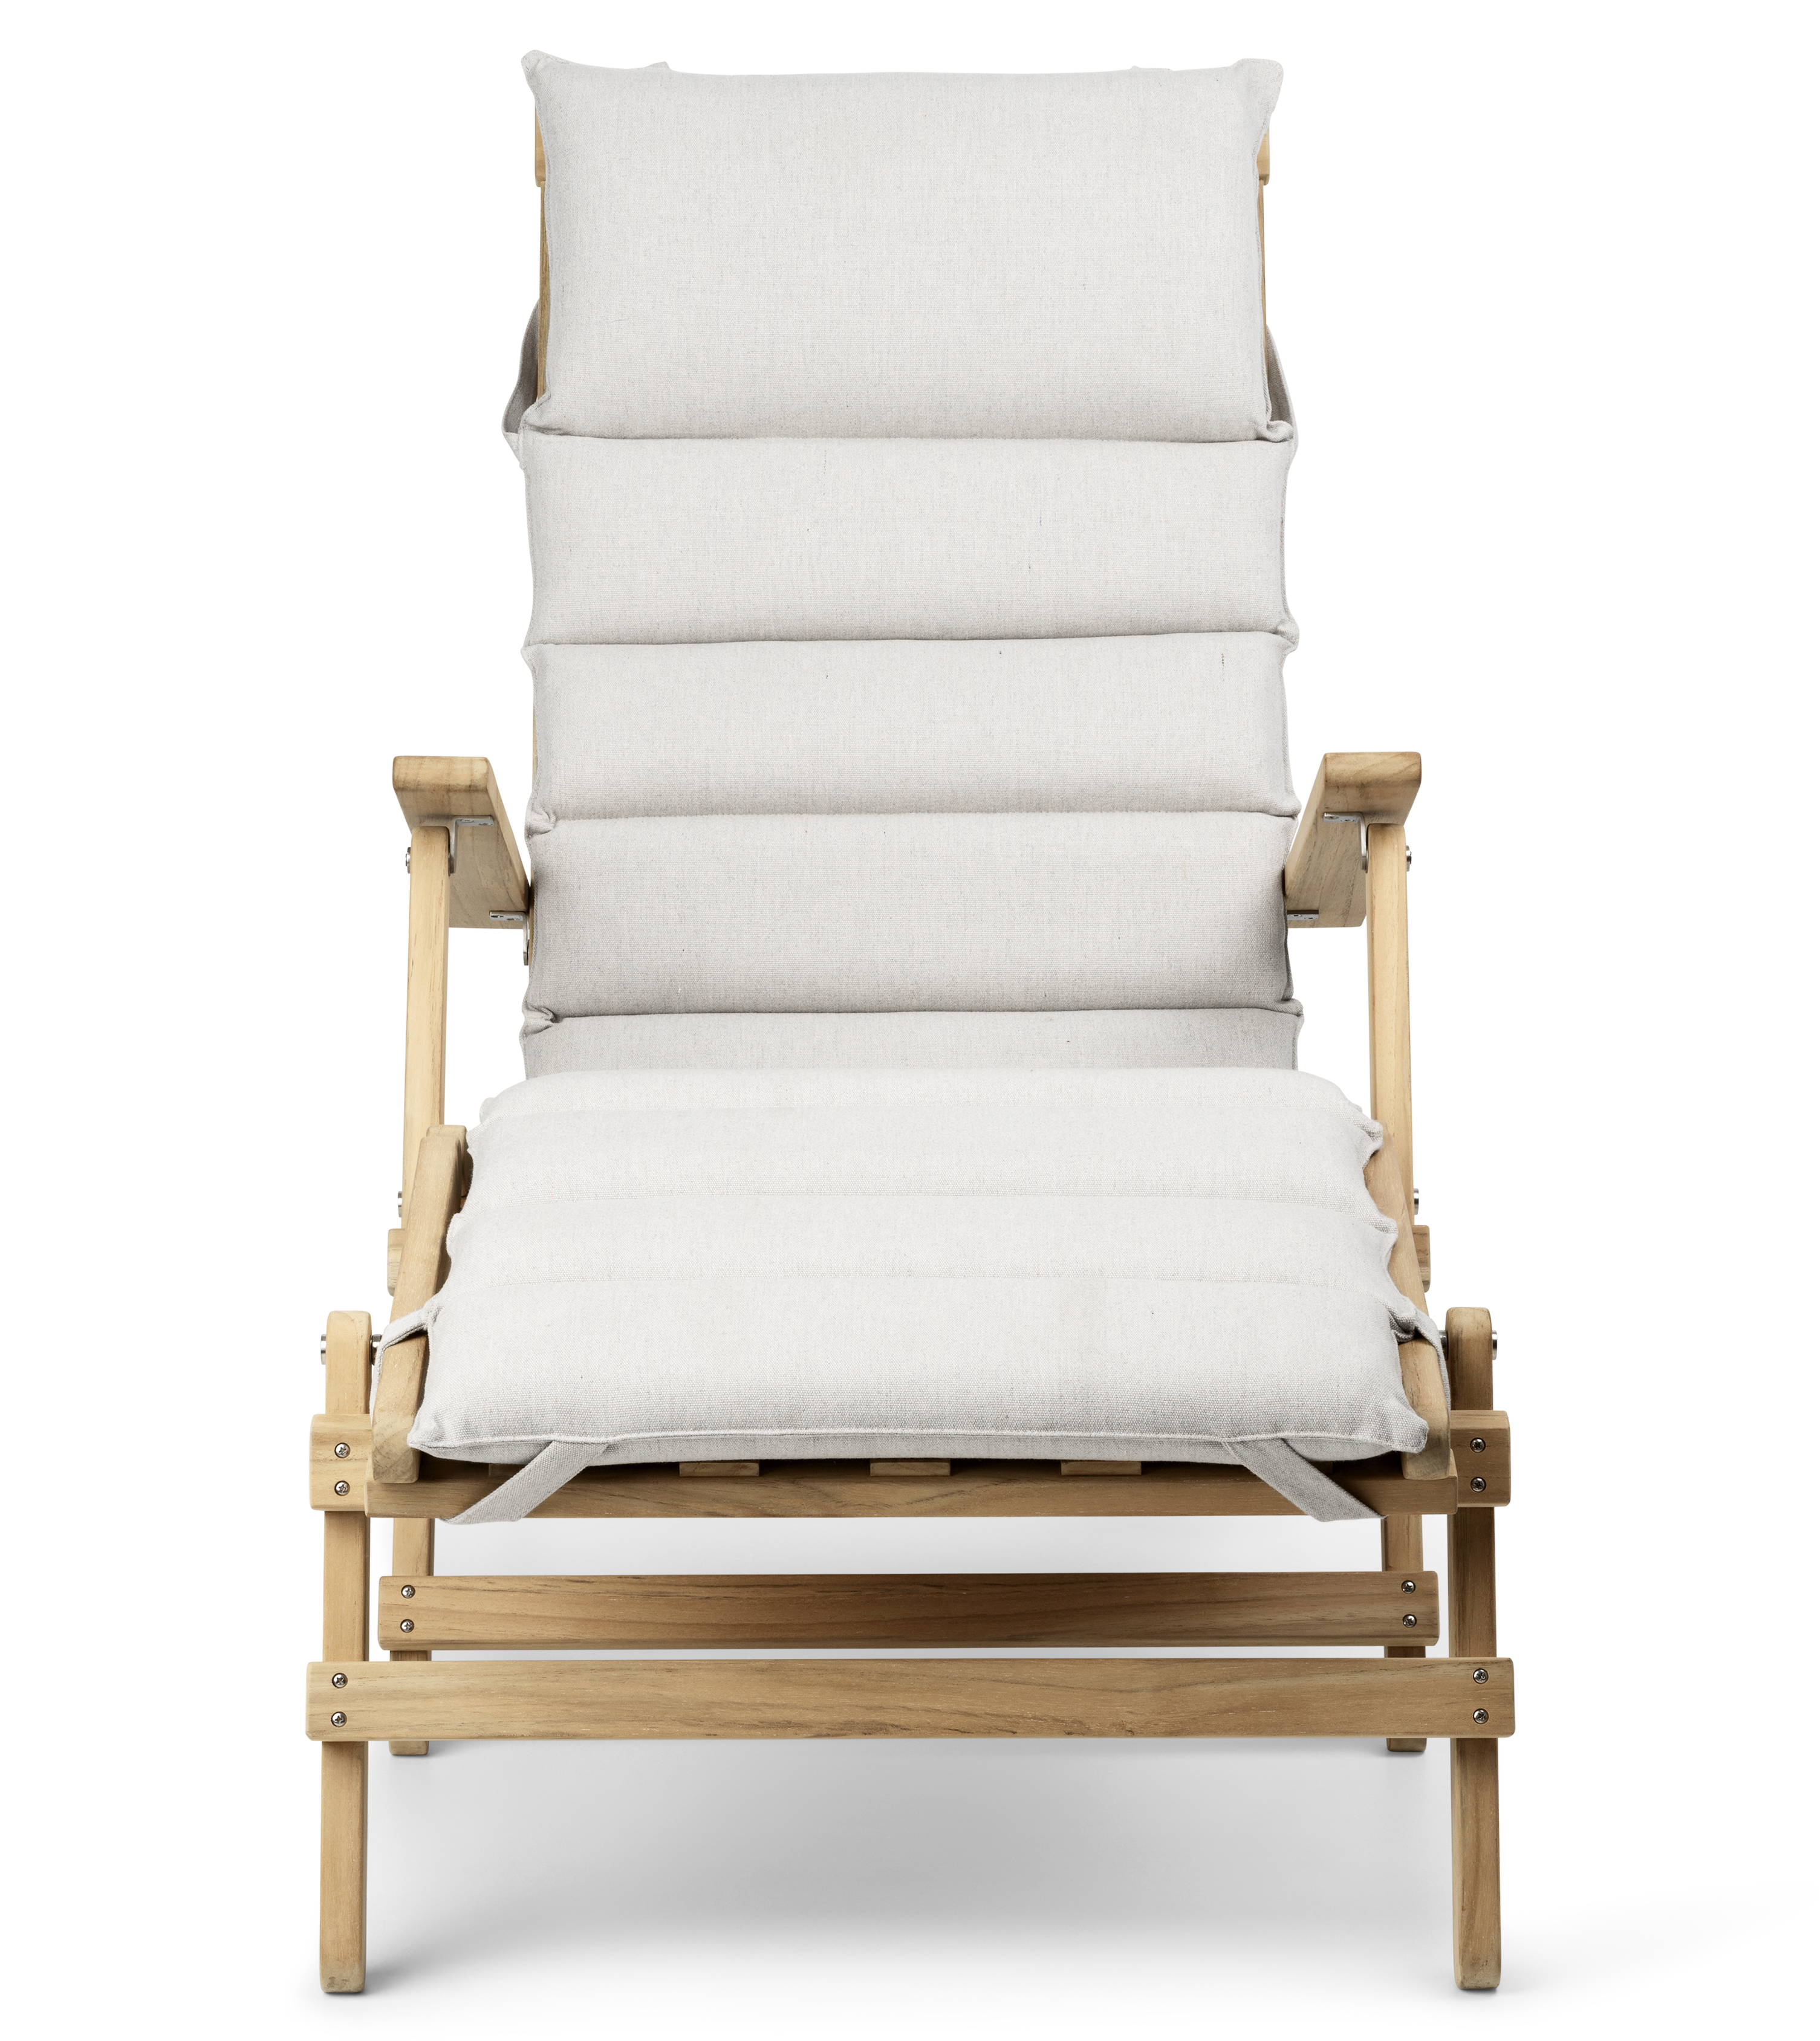 Bm5565 Deck Chair By Børge Mogense, Outdoor Chair With Footrest